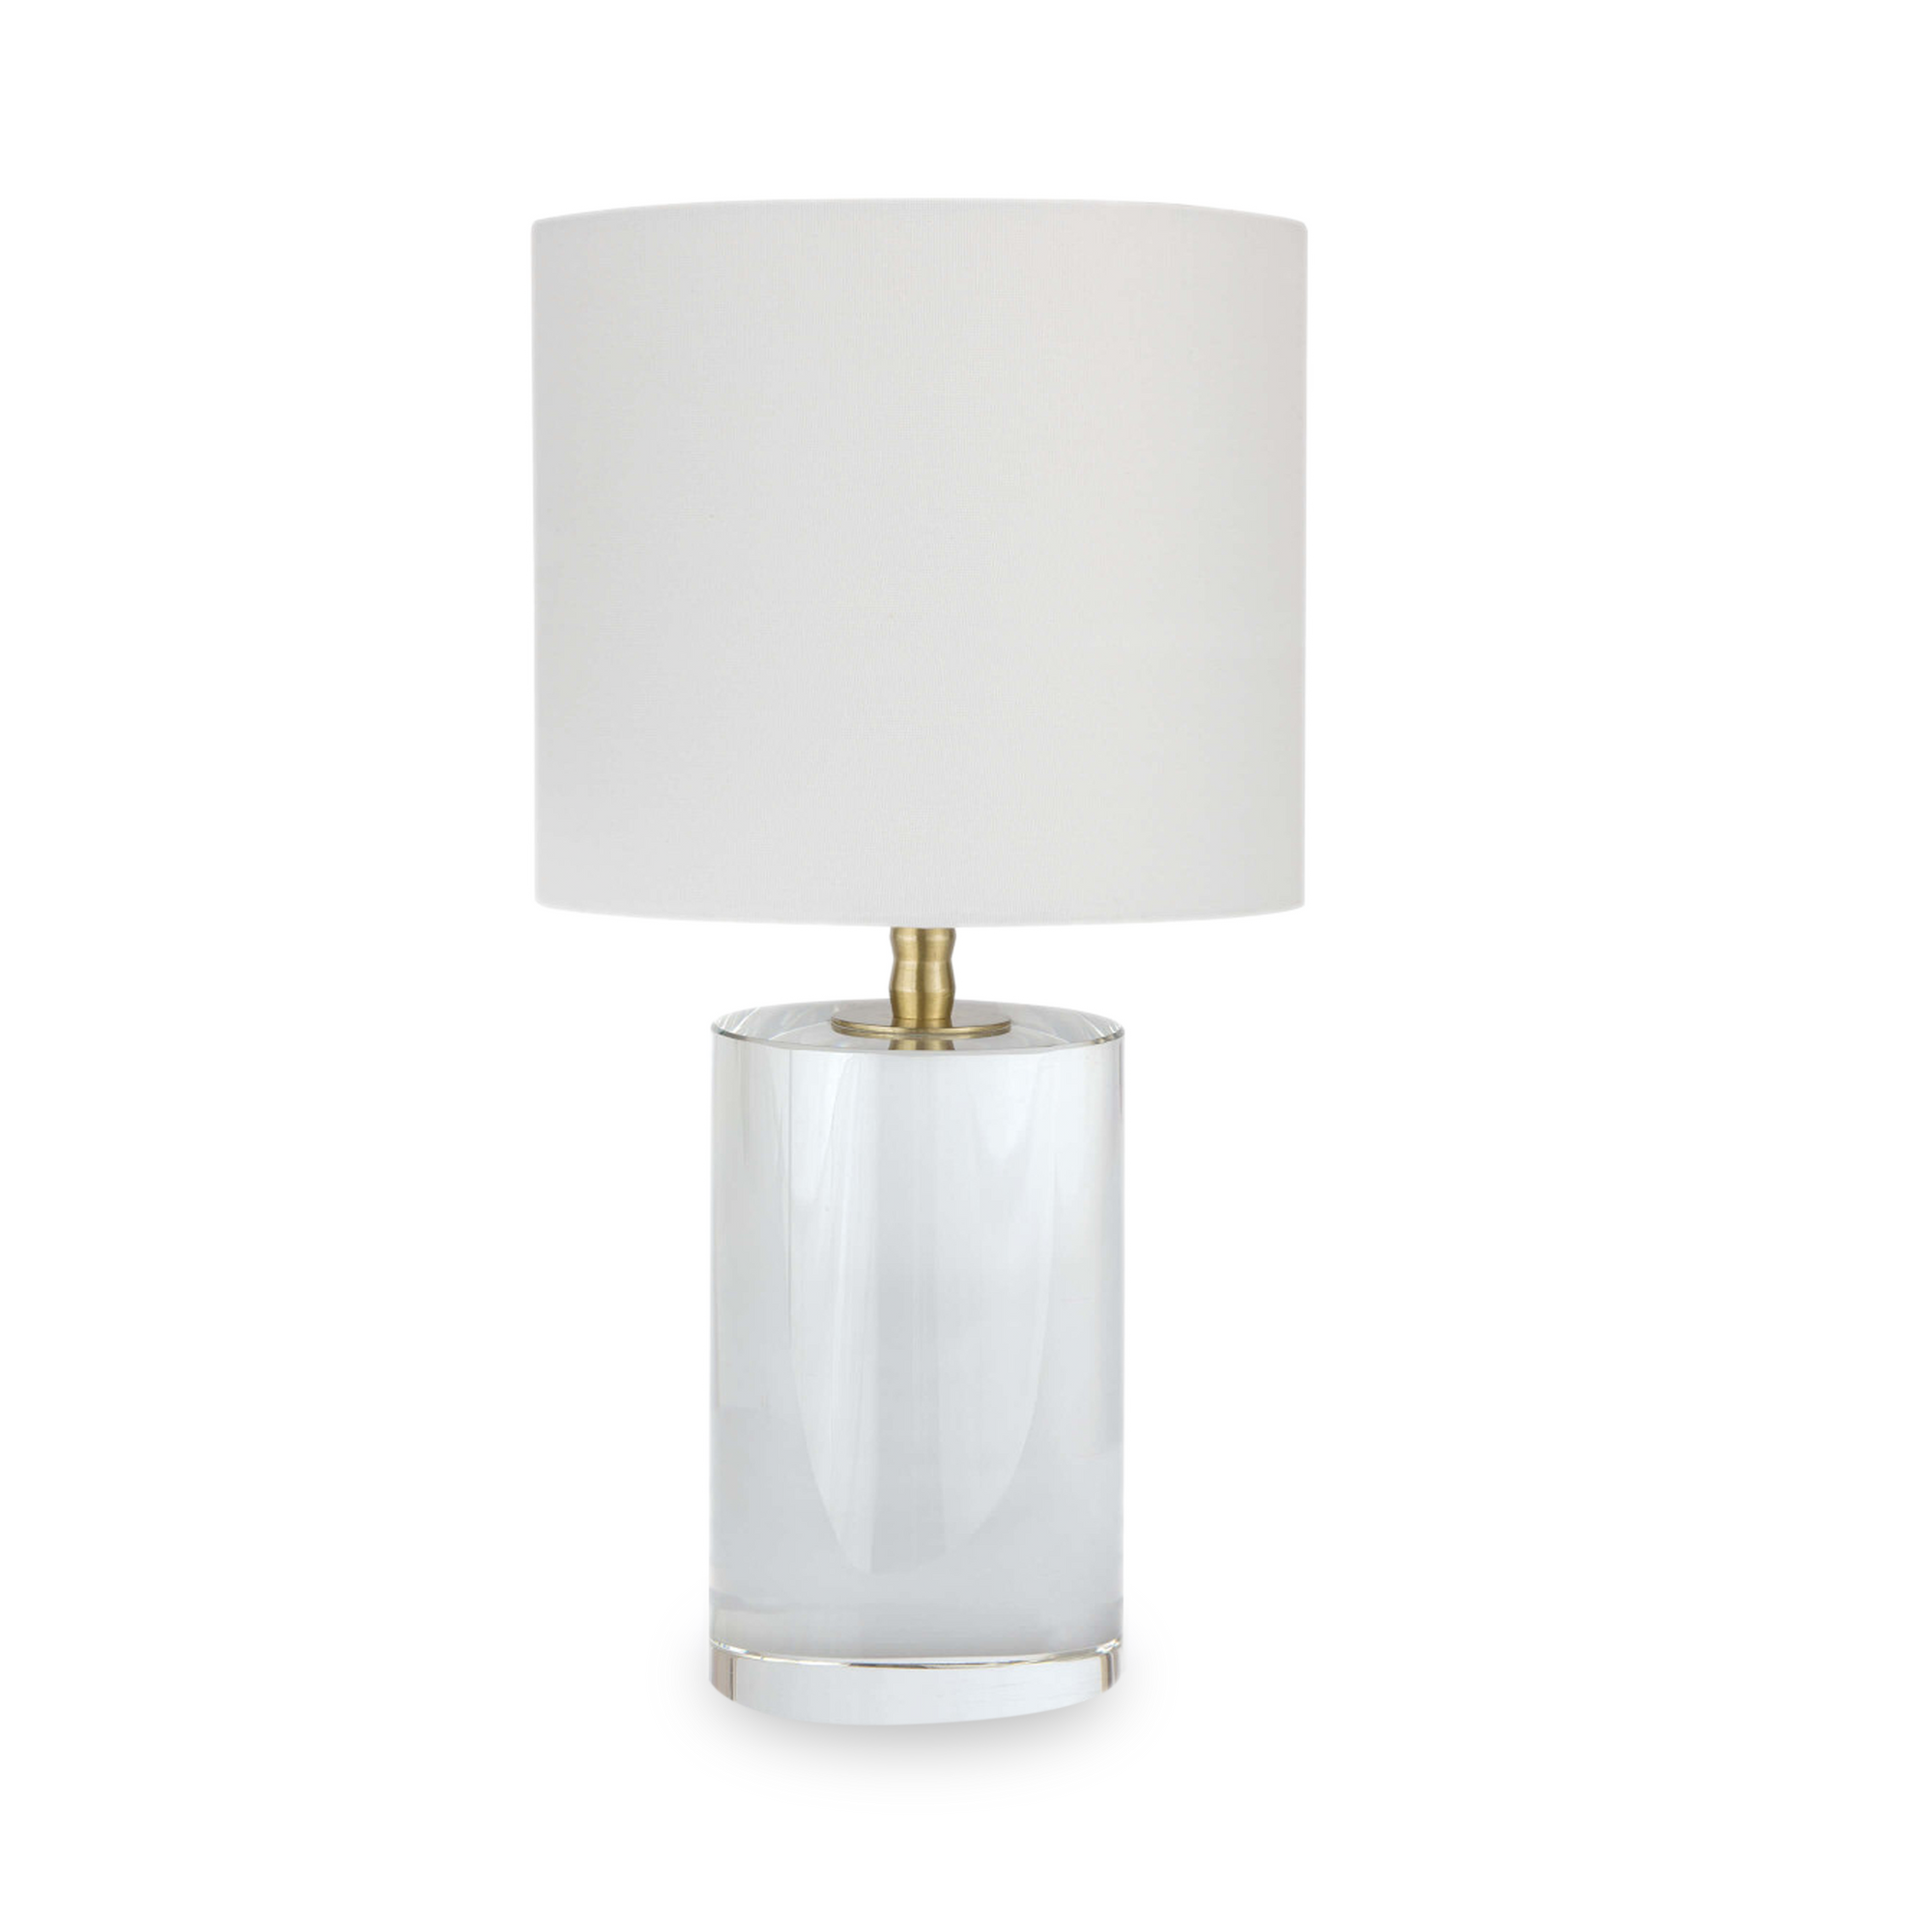 This solid crystal cylinder lamp base features a sleek silhouette and uniquely designed natural brass neck.